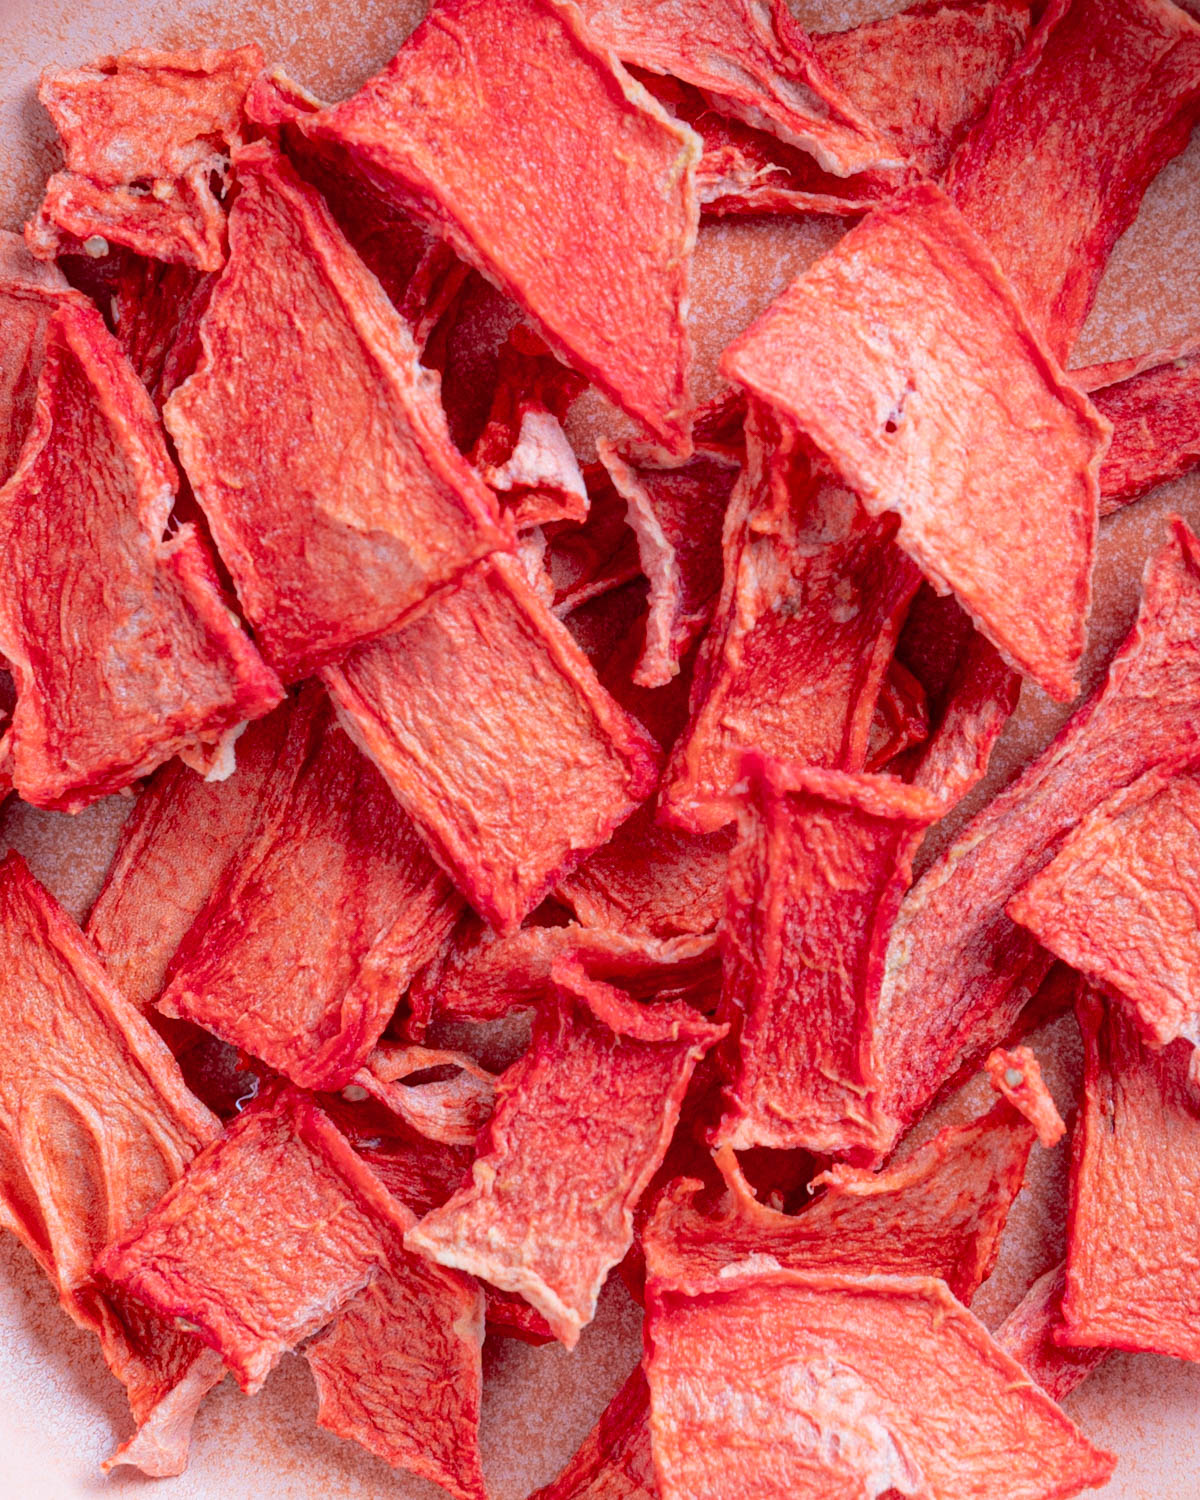 Close up of bright redish-pink dehydrated watermelon